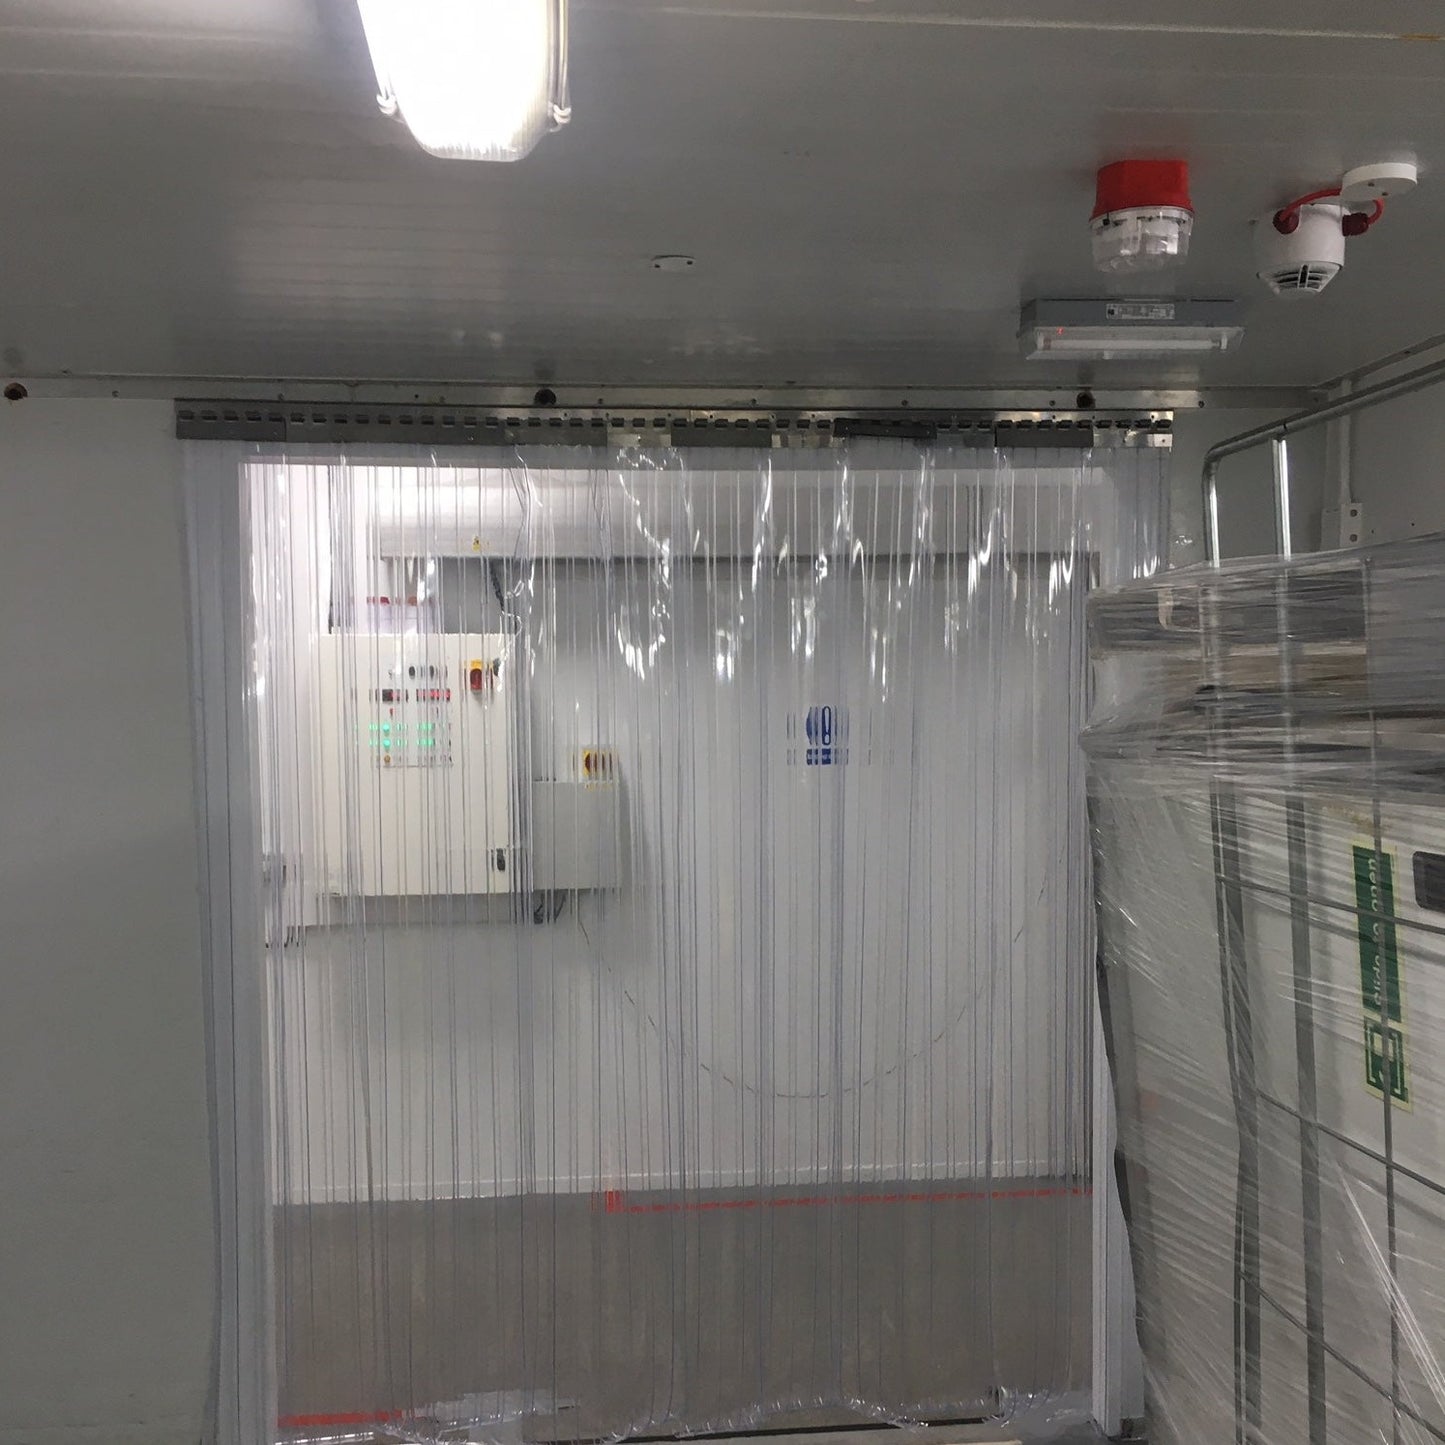 Strip Curtains Coldroom chiller Complete kit PVC with Hanging Rail for 900mm Doorway